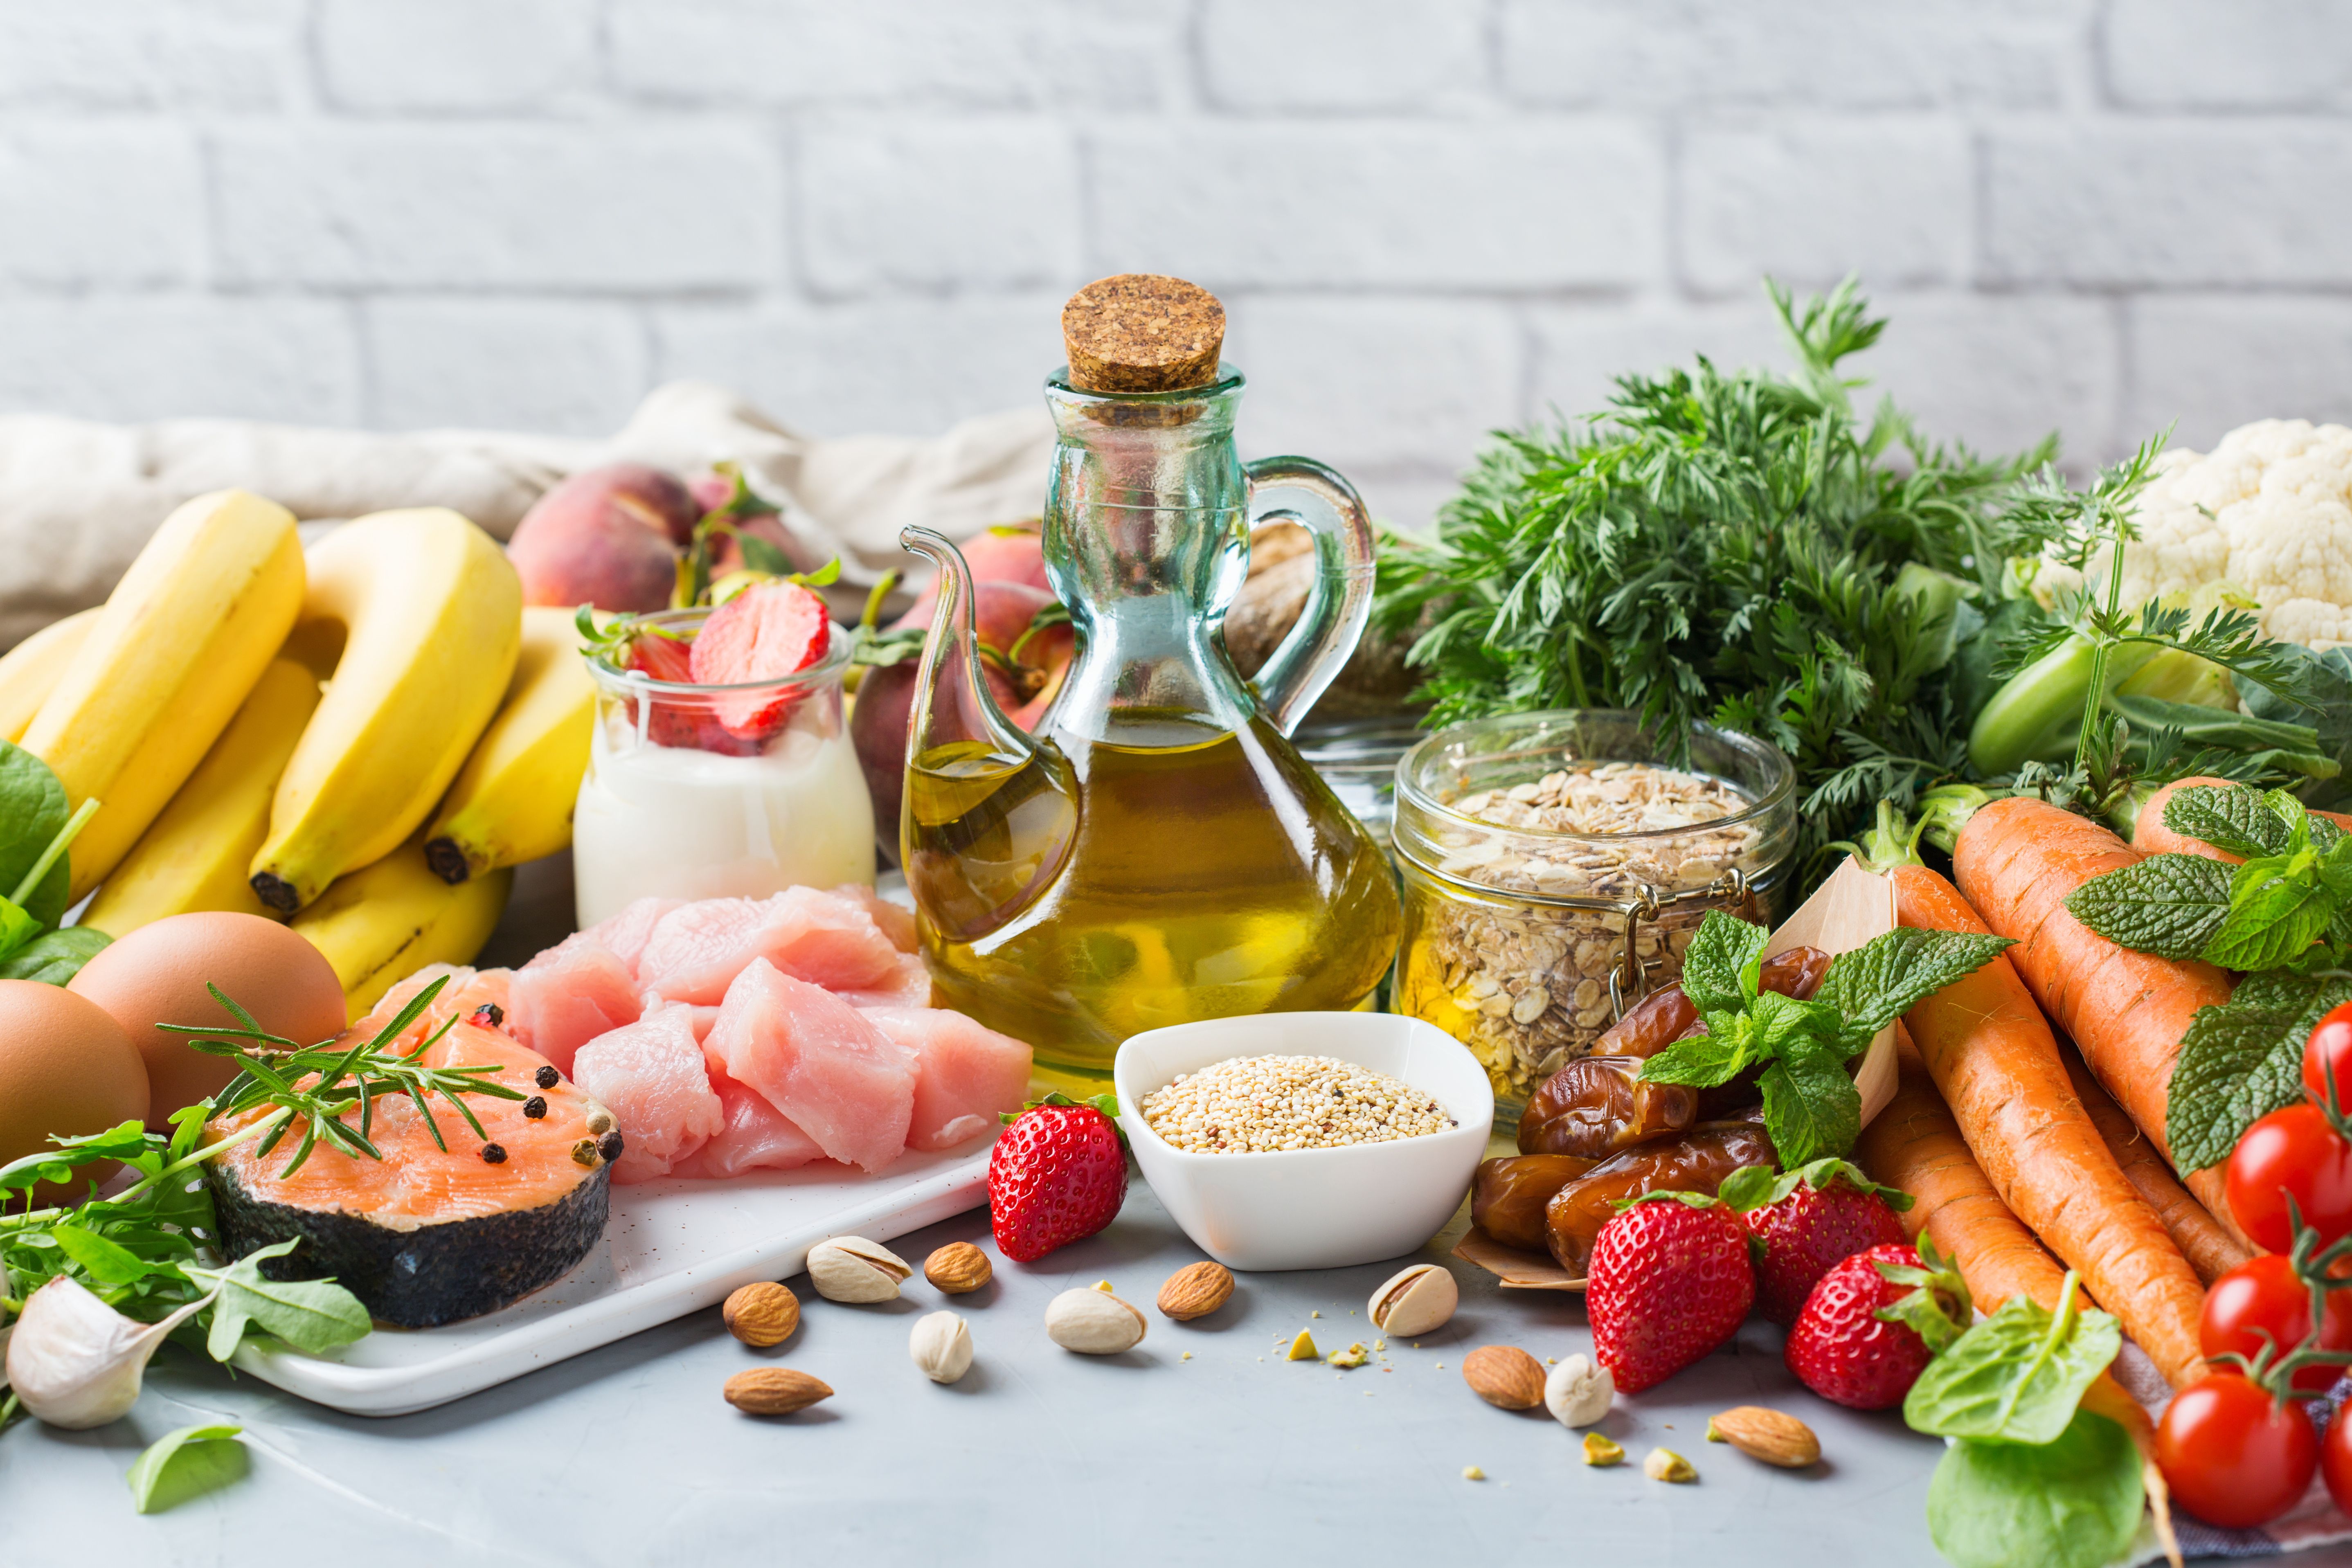 Study shows: Mediterranean diet can reduce risk of death by 23%